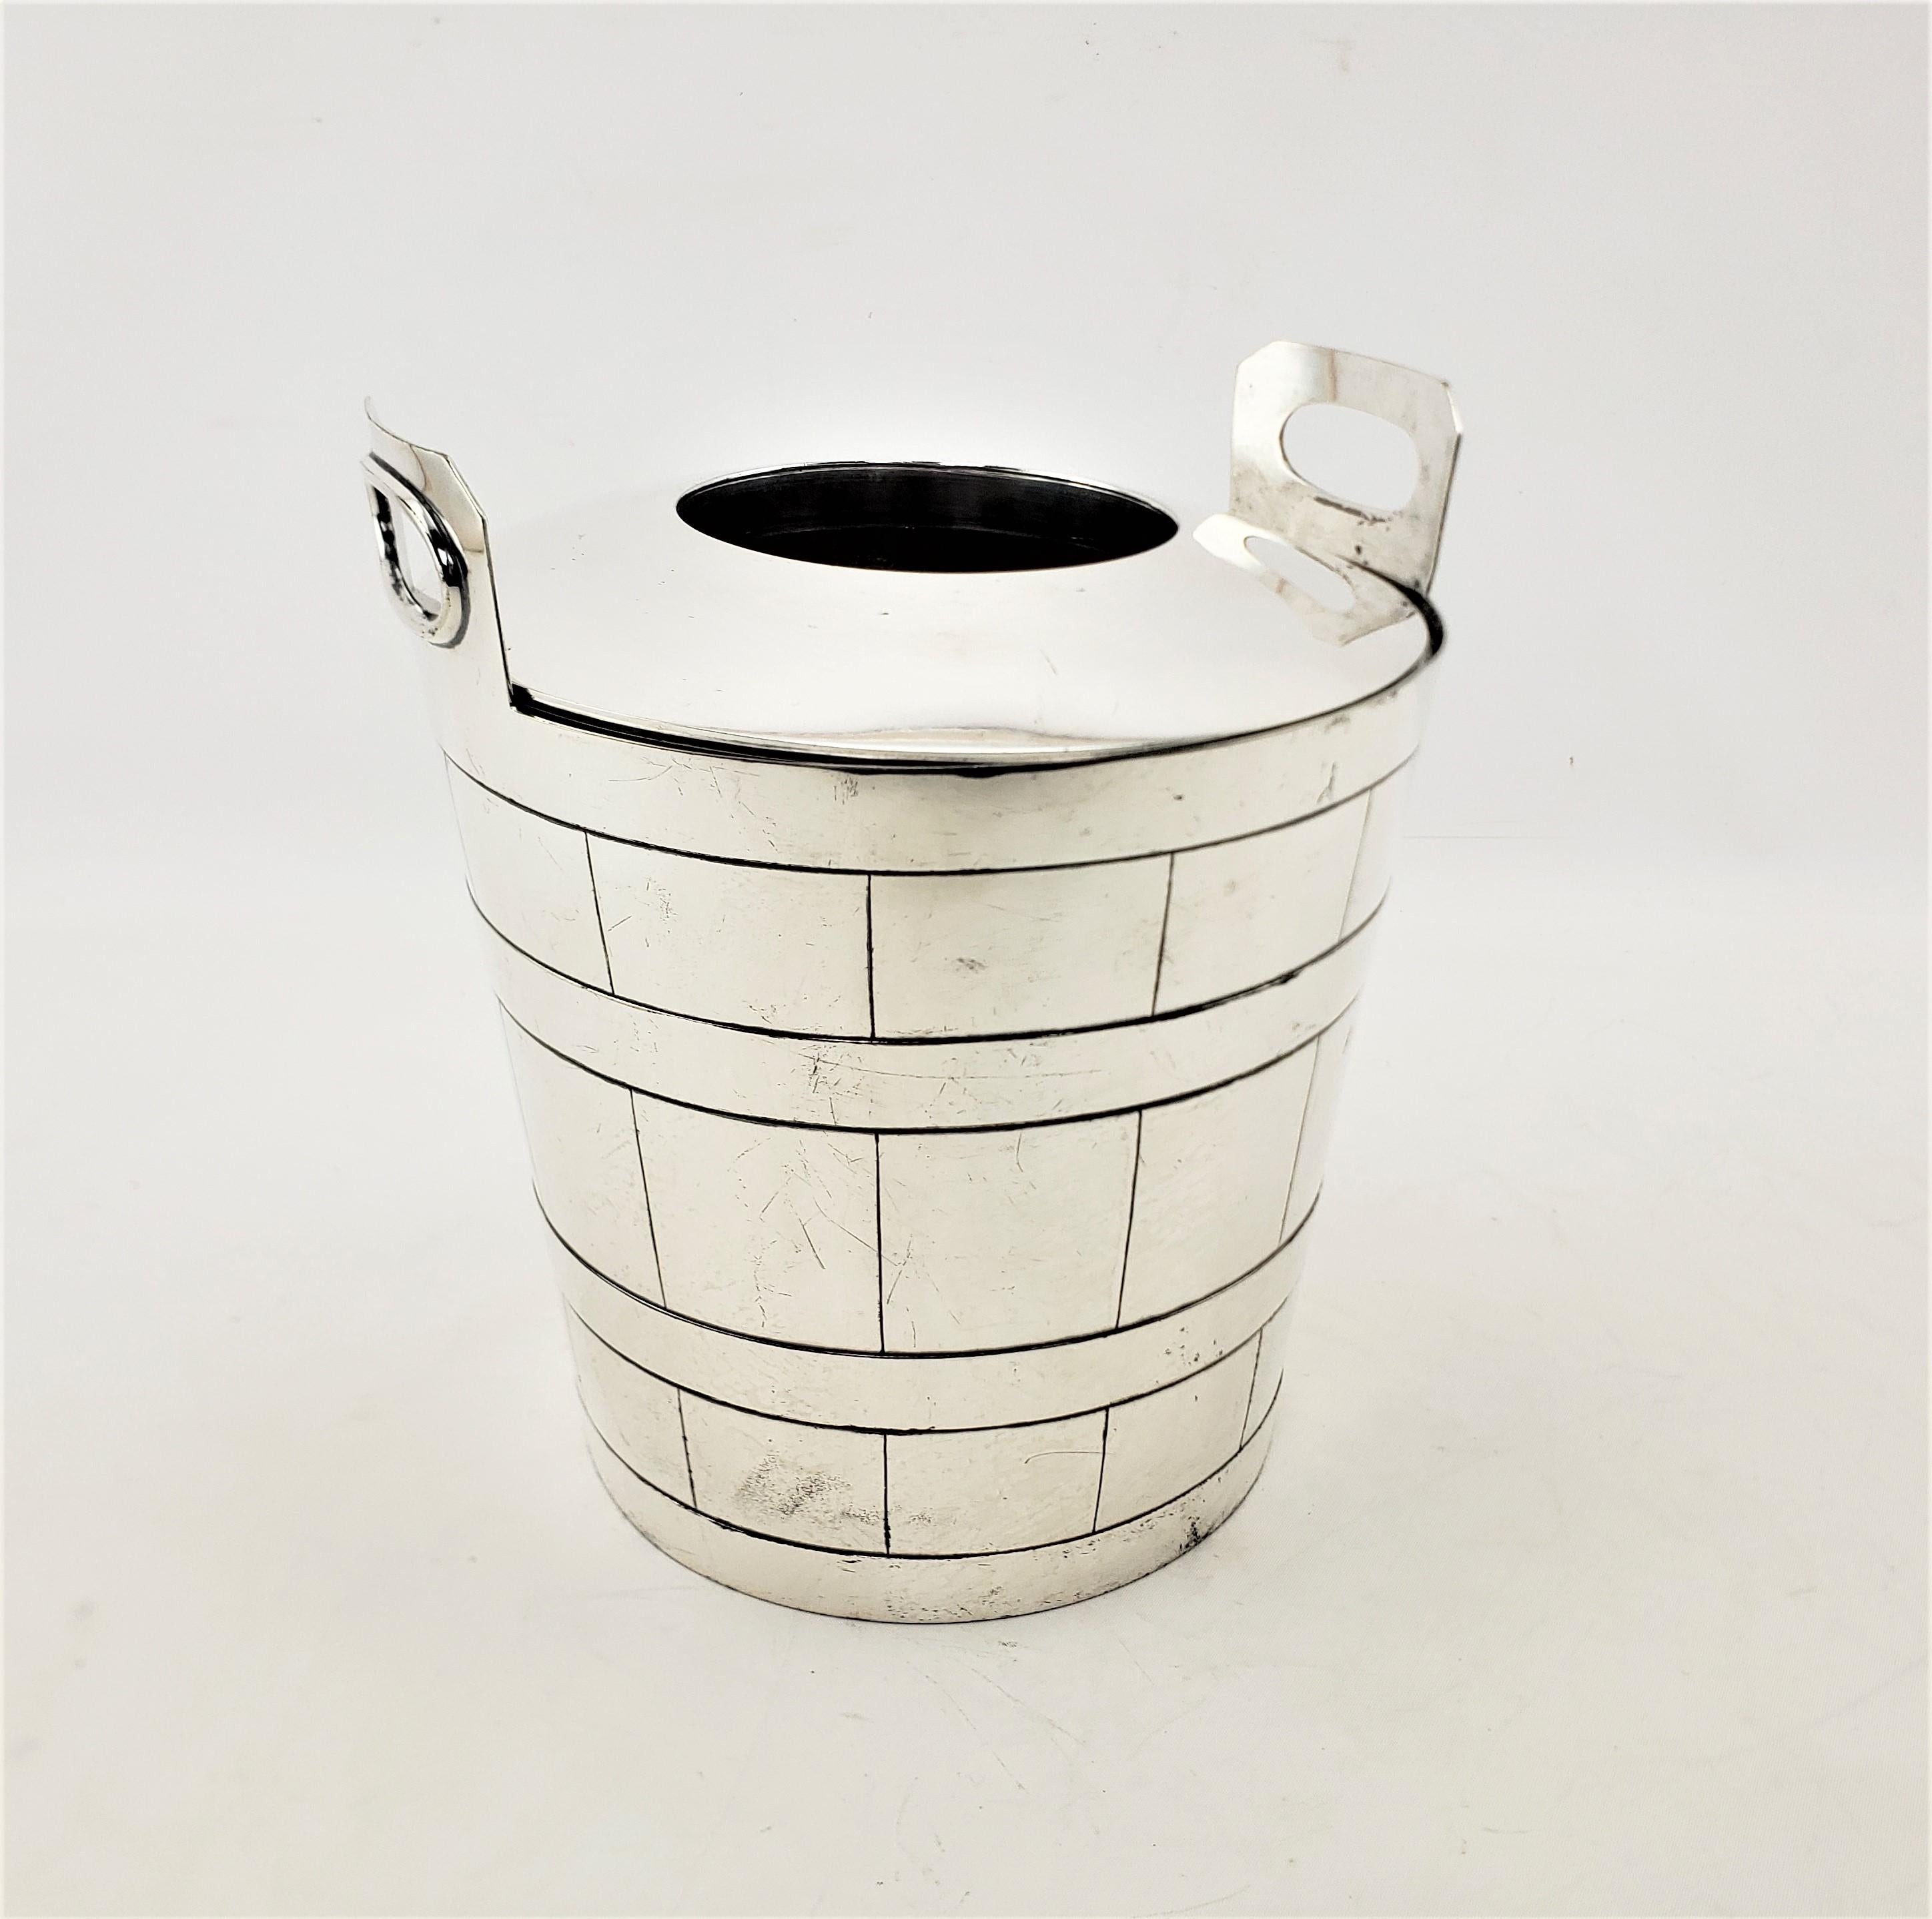 English Antique Georgian Styled Silver Plated Wine Cooler with Staved Wood Bucket Design For Sale